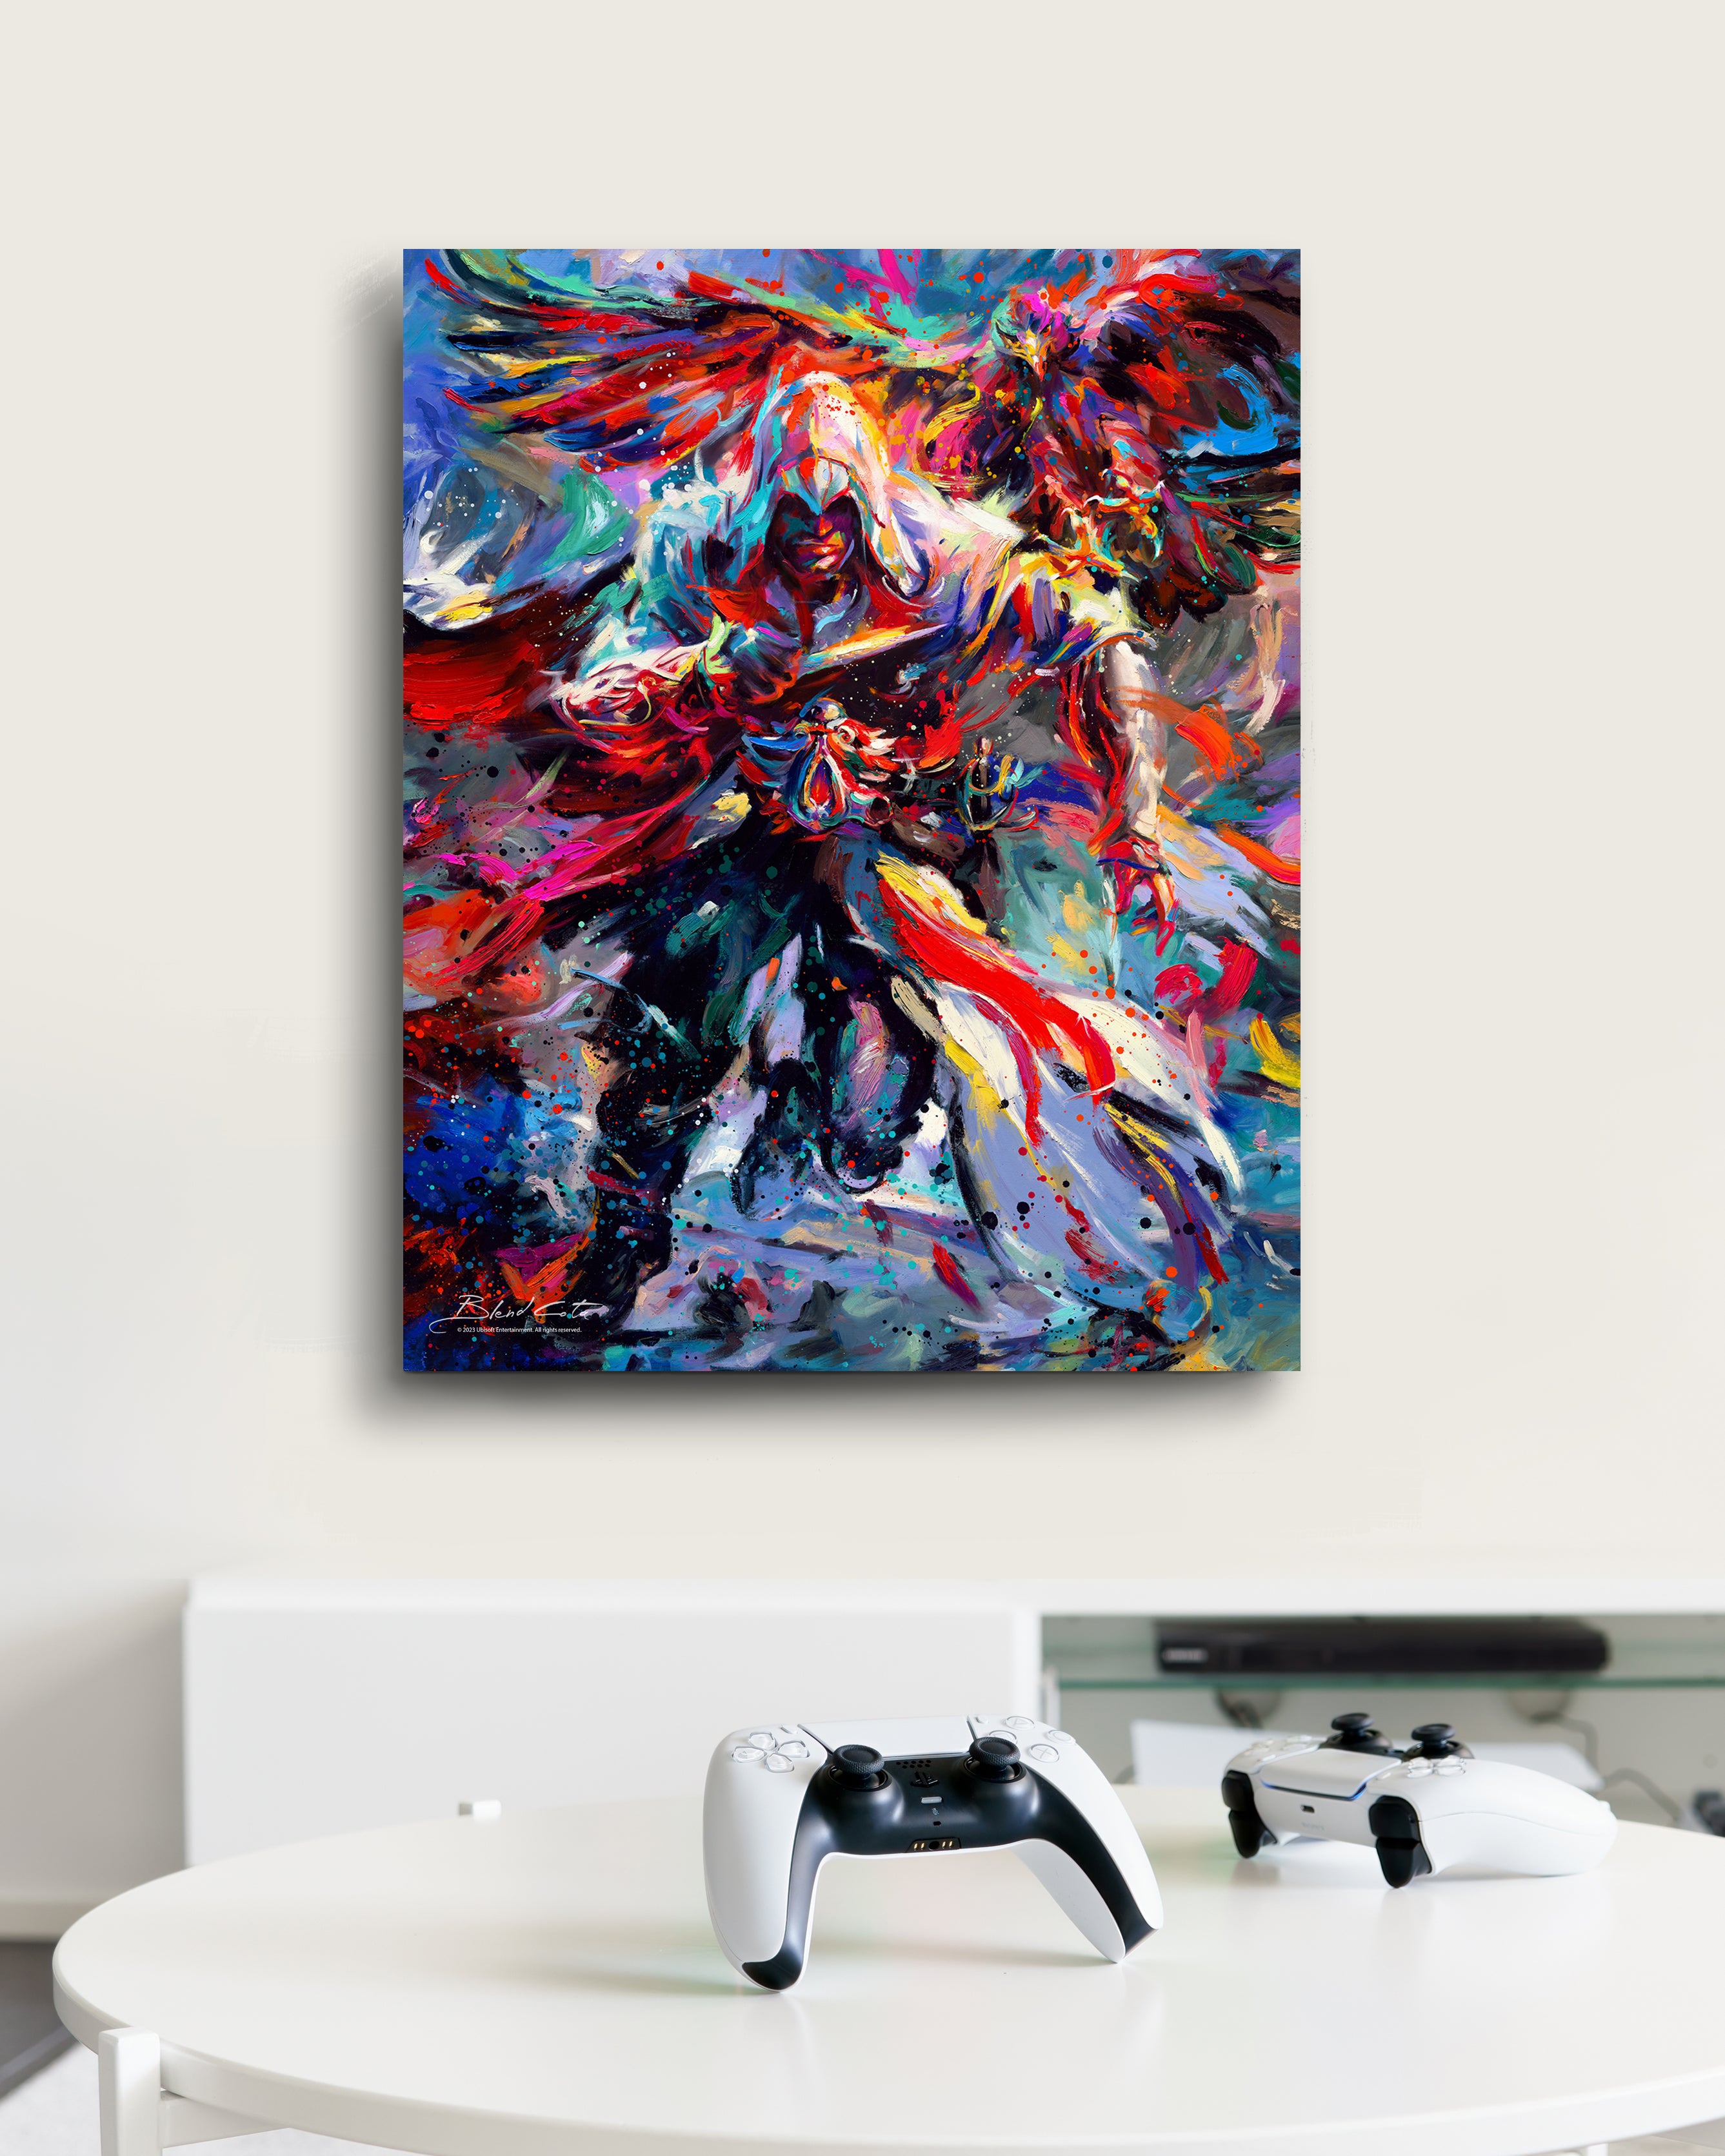 Limited edition artwork on canvas of Assassin's Creed Ezio Auditore and Eagle bursting forth with energy and painted with colorful brushstrokes in an expressionistic style in a room setting.